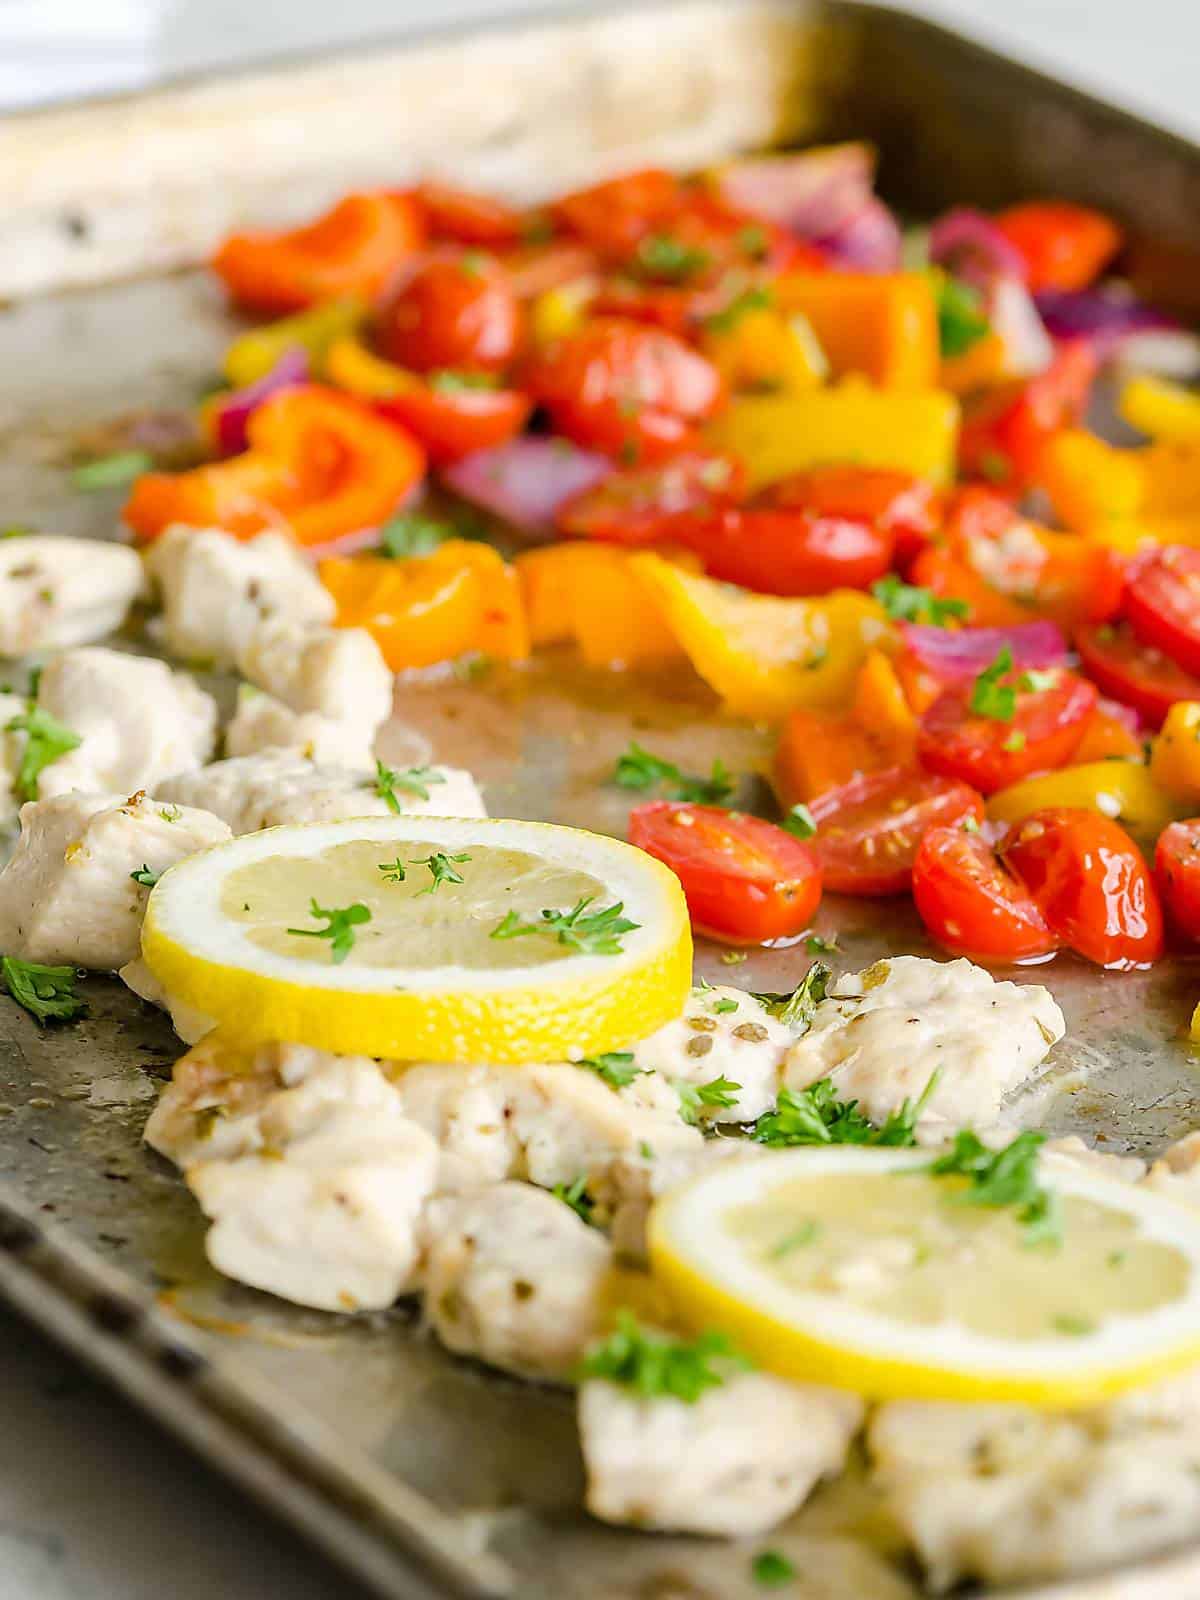 Greek chicken sheet pan dinner- diced chicken, peppers, onions, tomatoes, lemon slices cooked on a sheet pan, garnished with fresh parsley.